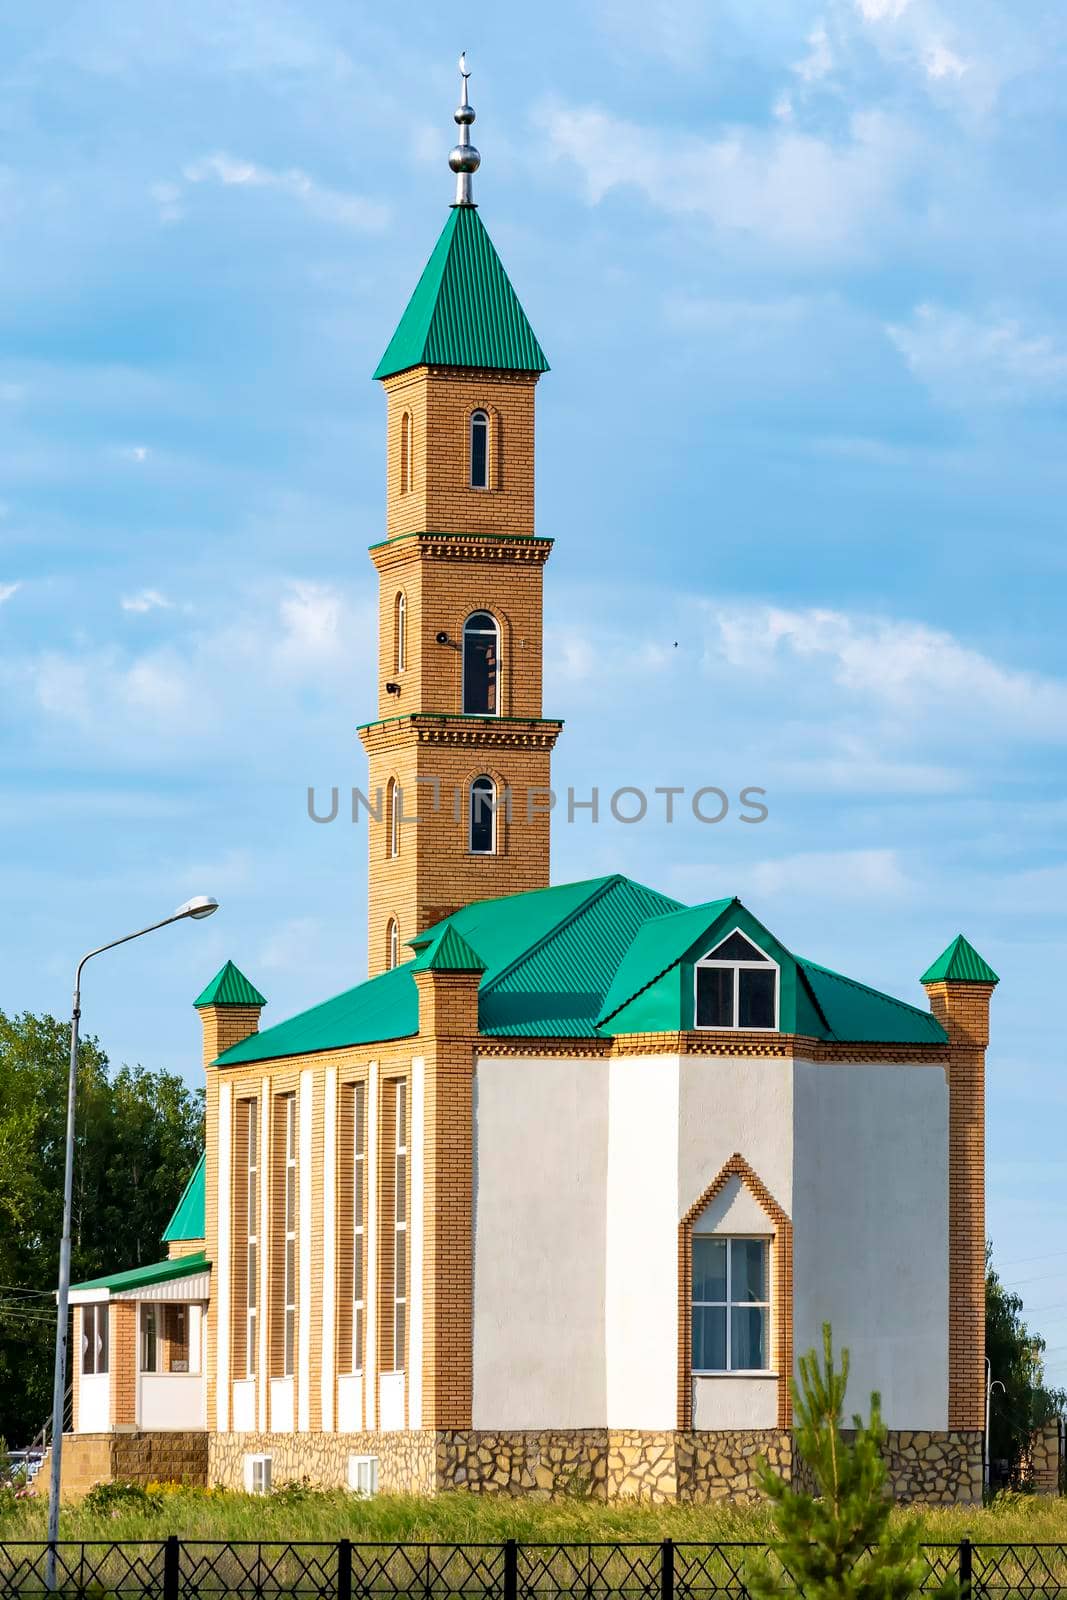 Mosque against a beautiful sky. Outdoors, day light front view. by Essffes